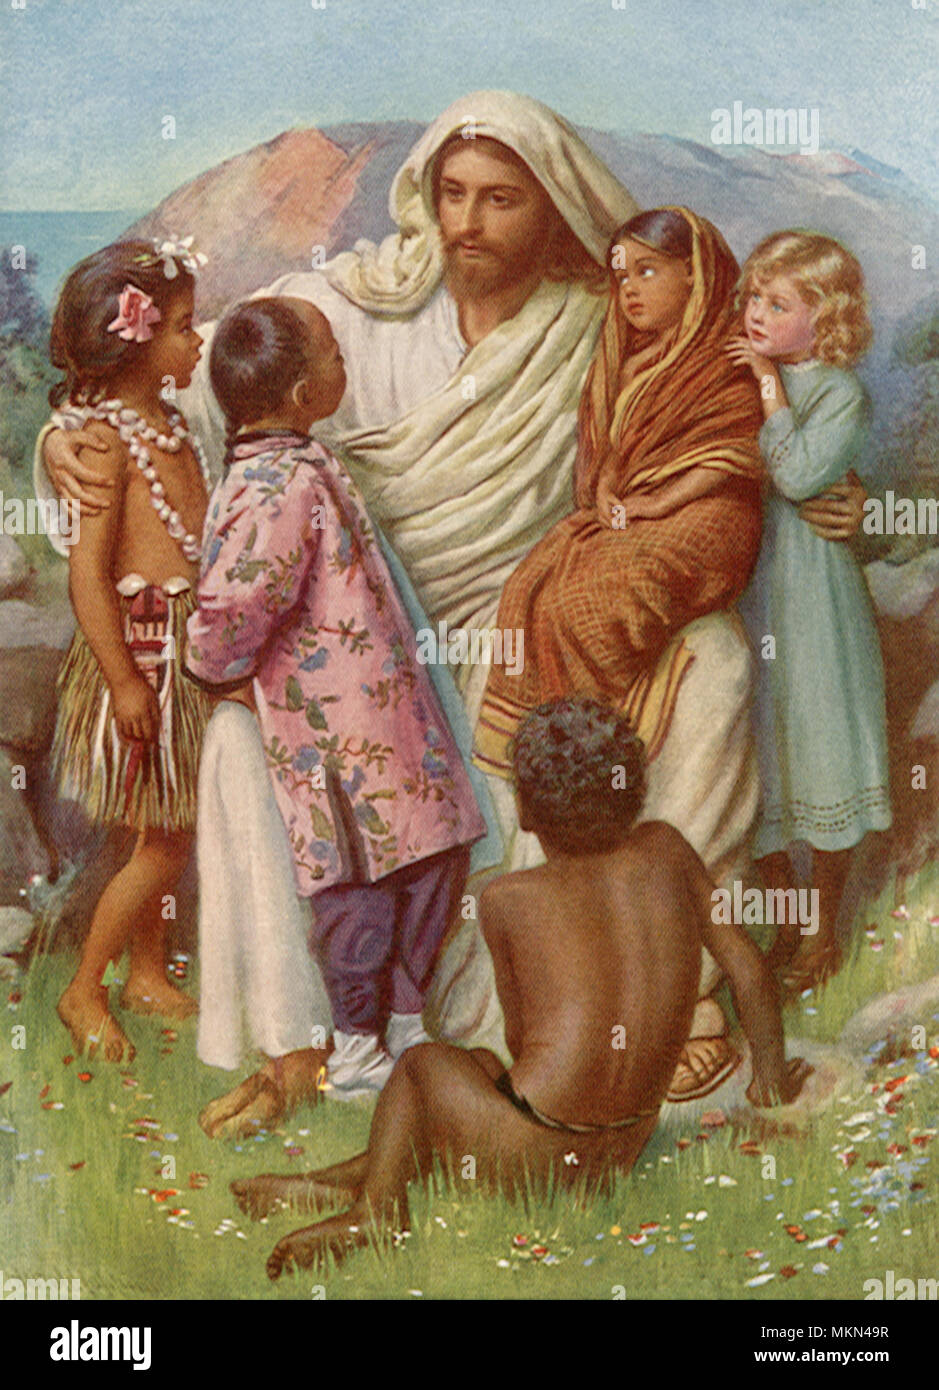 Jesus Christ Surrounded by Children Stock Photo